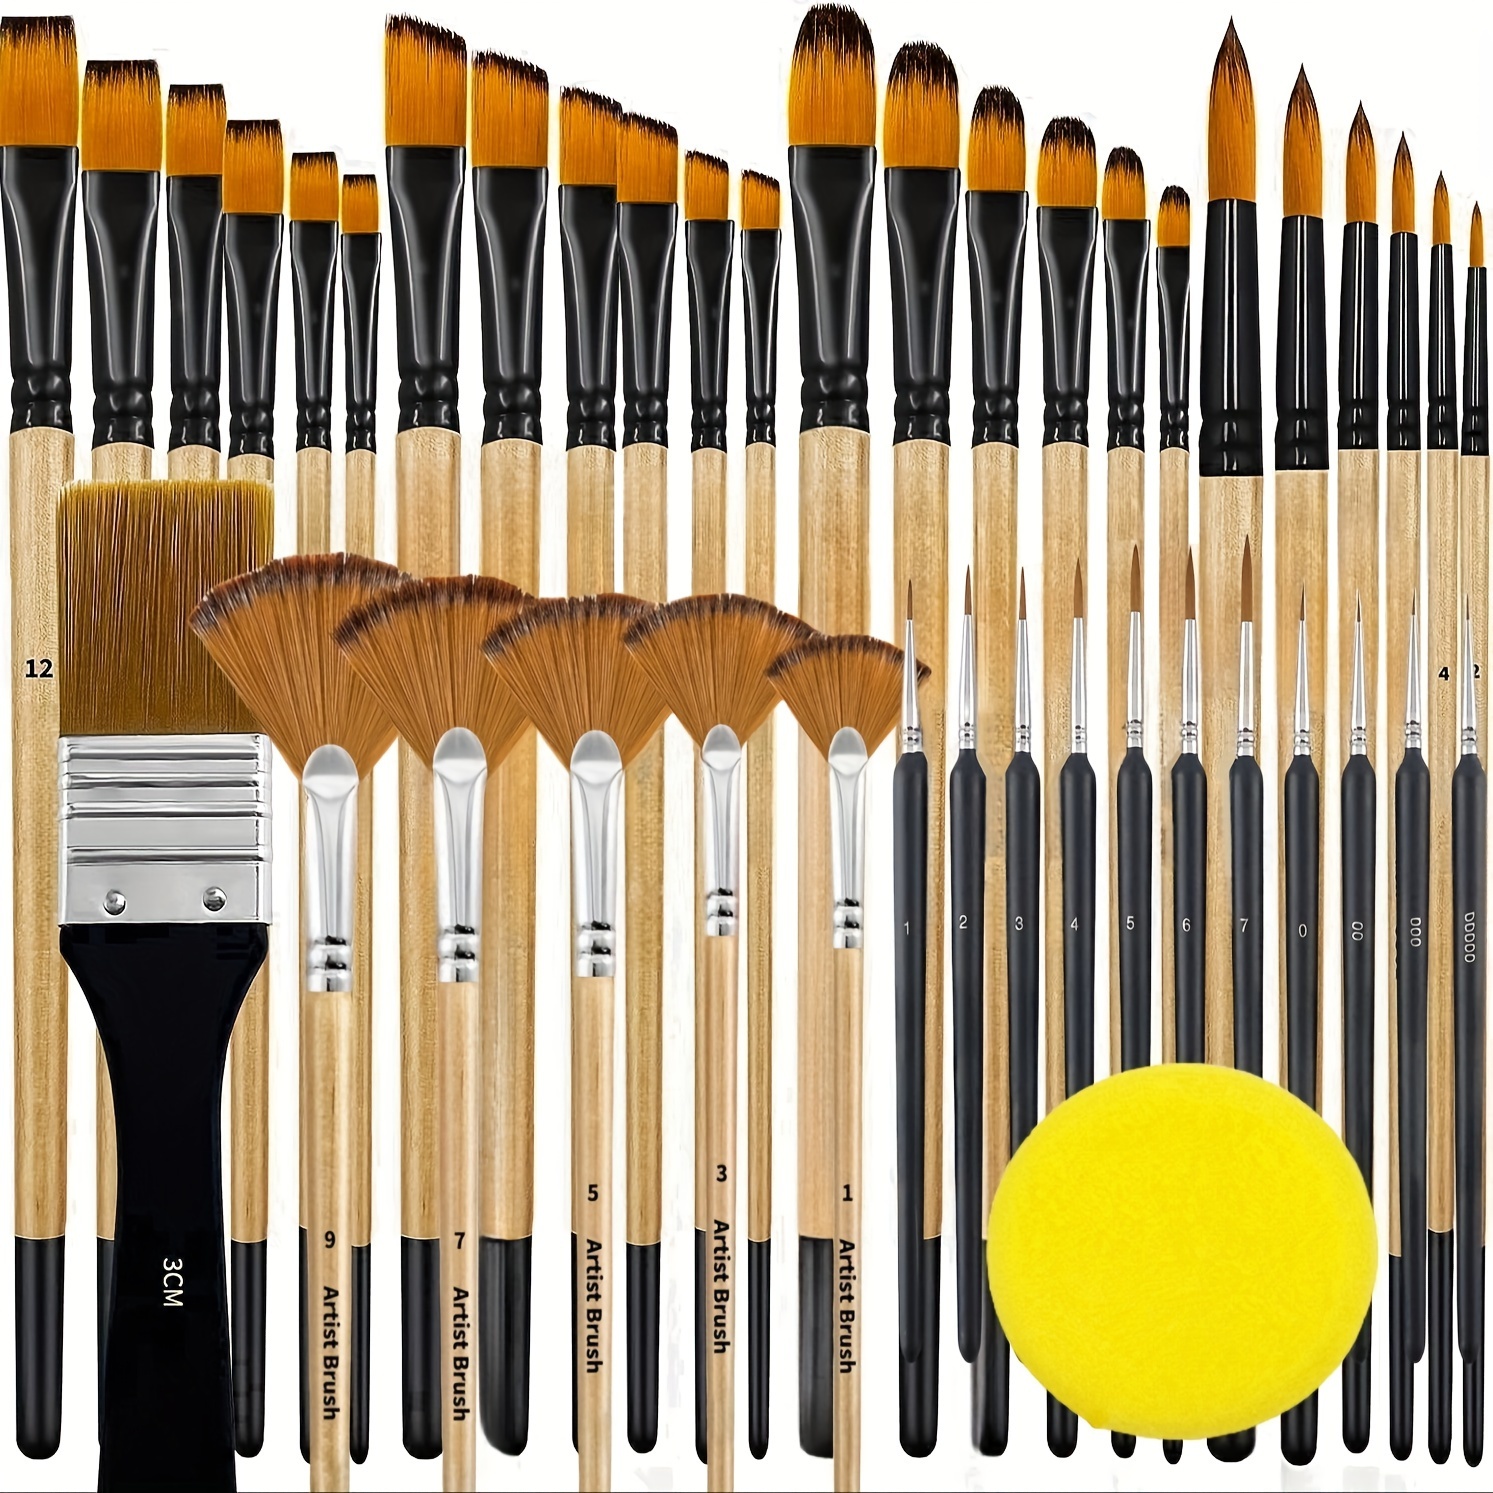 

42pcs Paint Brushes Set For Artists And Beginners, Wooden Handle Nylon Bristles Suit For Acrylic Painting, Watercolor, Oil, Gouache, Brush Tip Contain Flat, Round, Angle, Filbert, Fan, Detail Brushes.